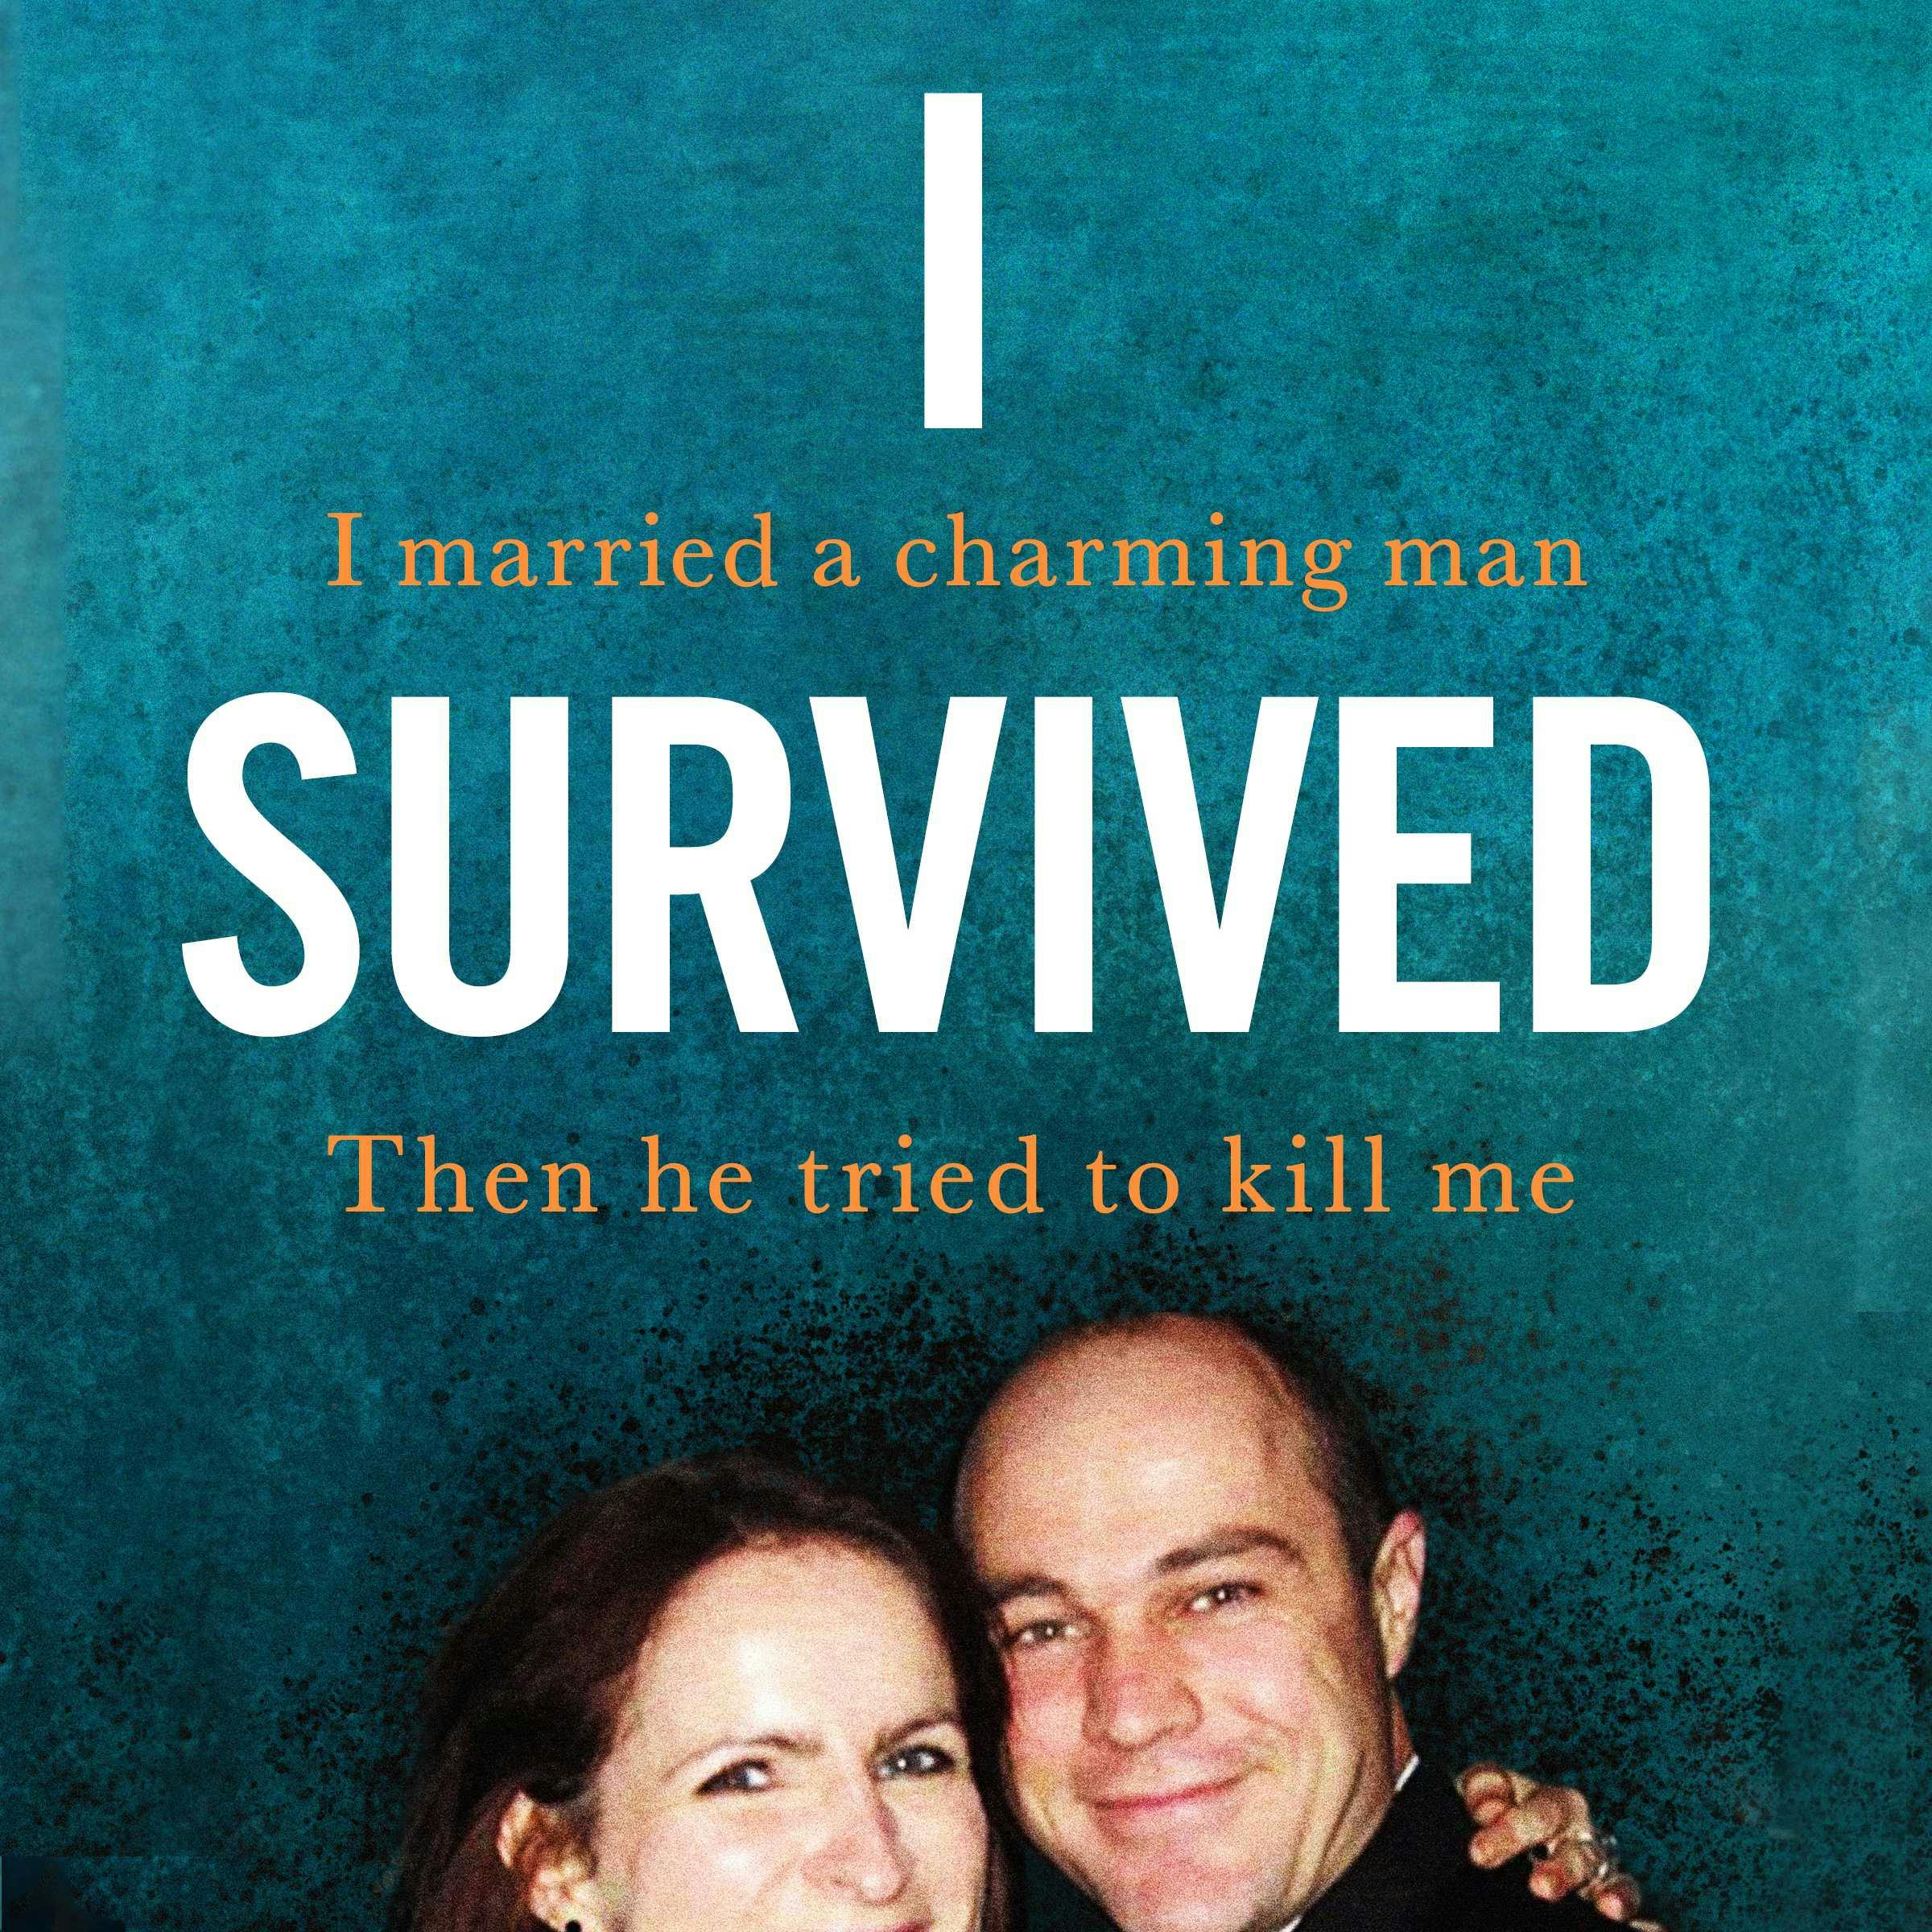 I Survived: I married a charming man. Then he tried to kill me. A true story. - Victoria Cilliers